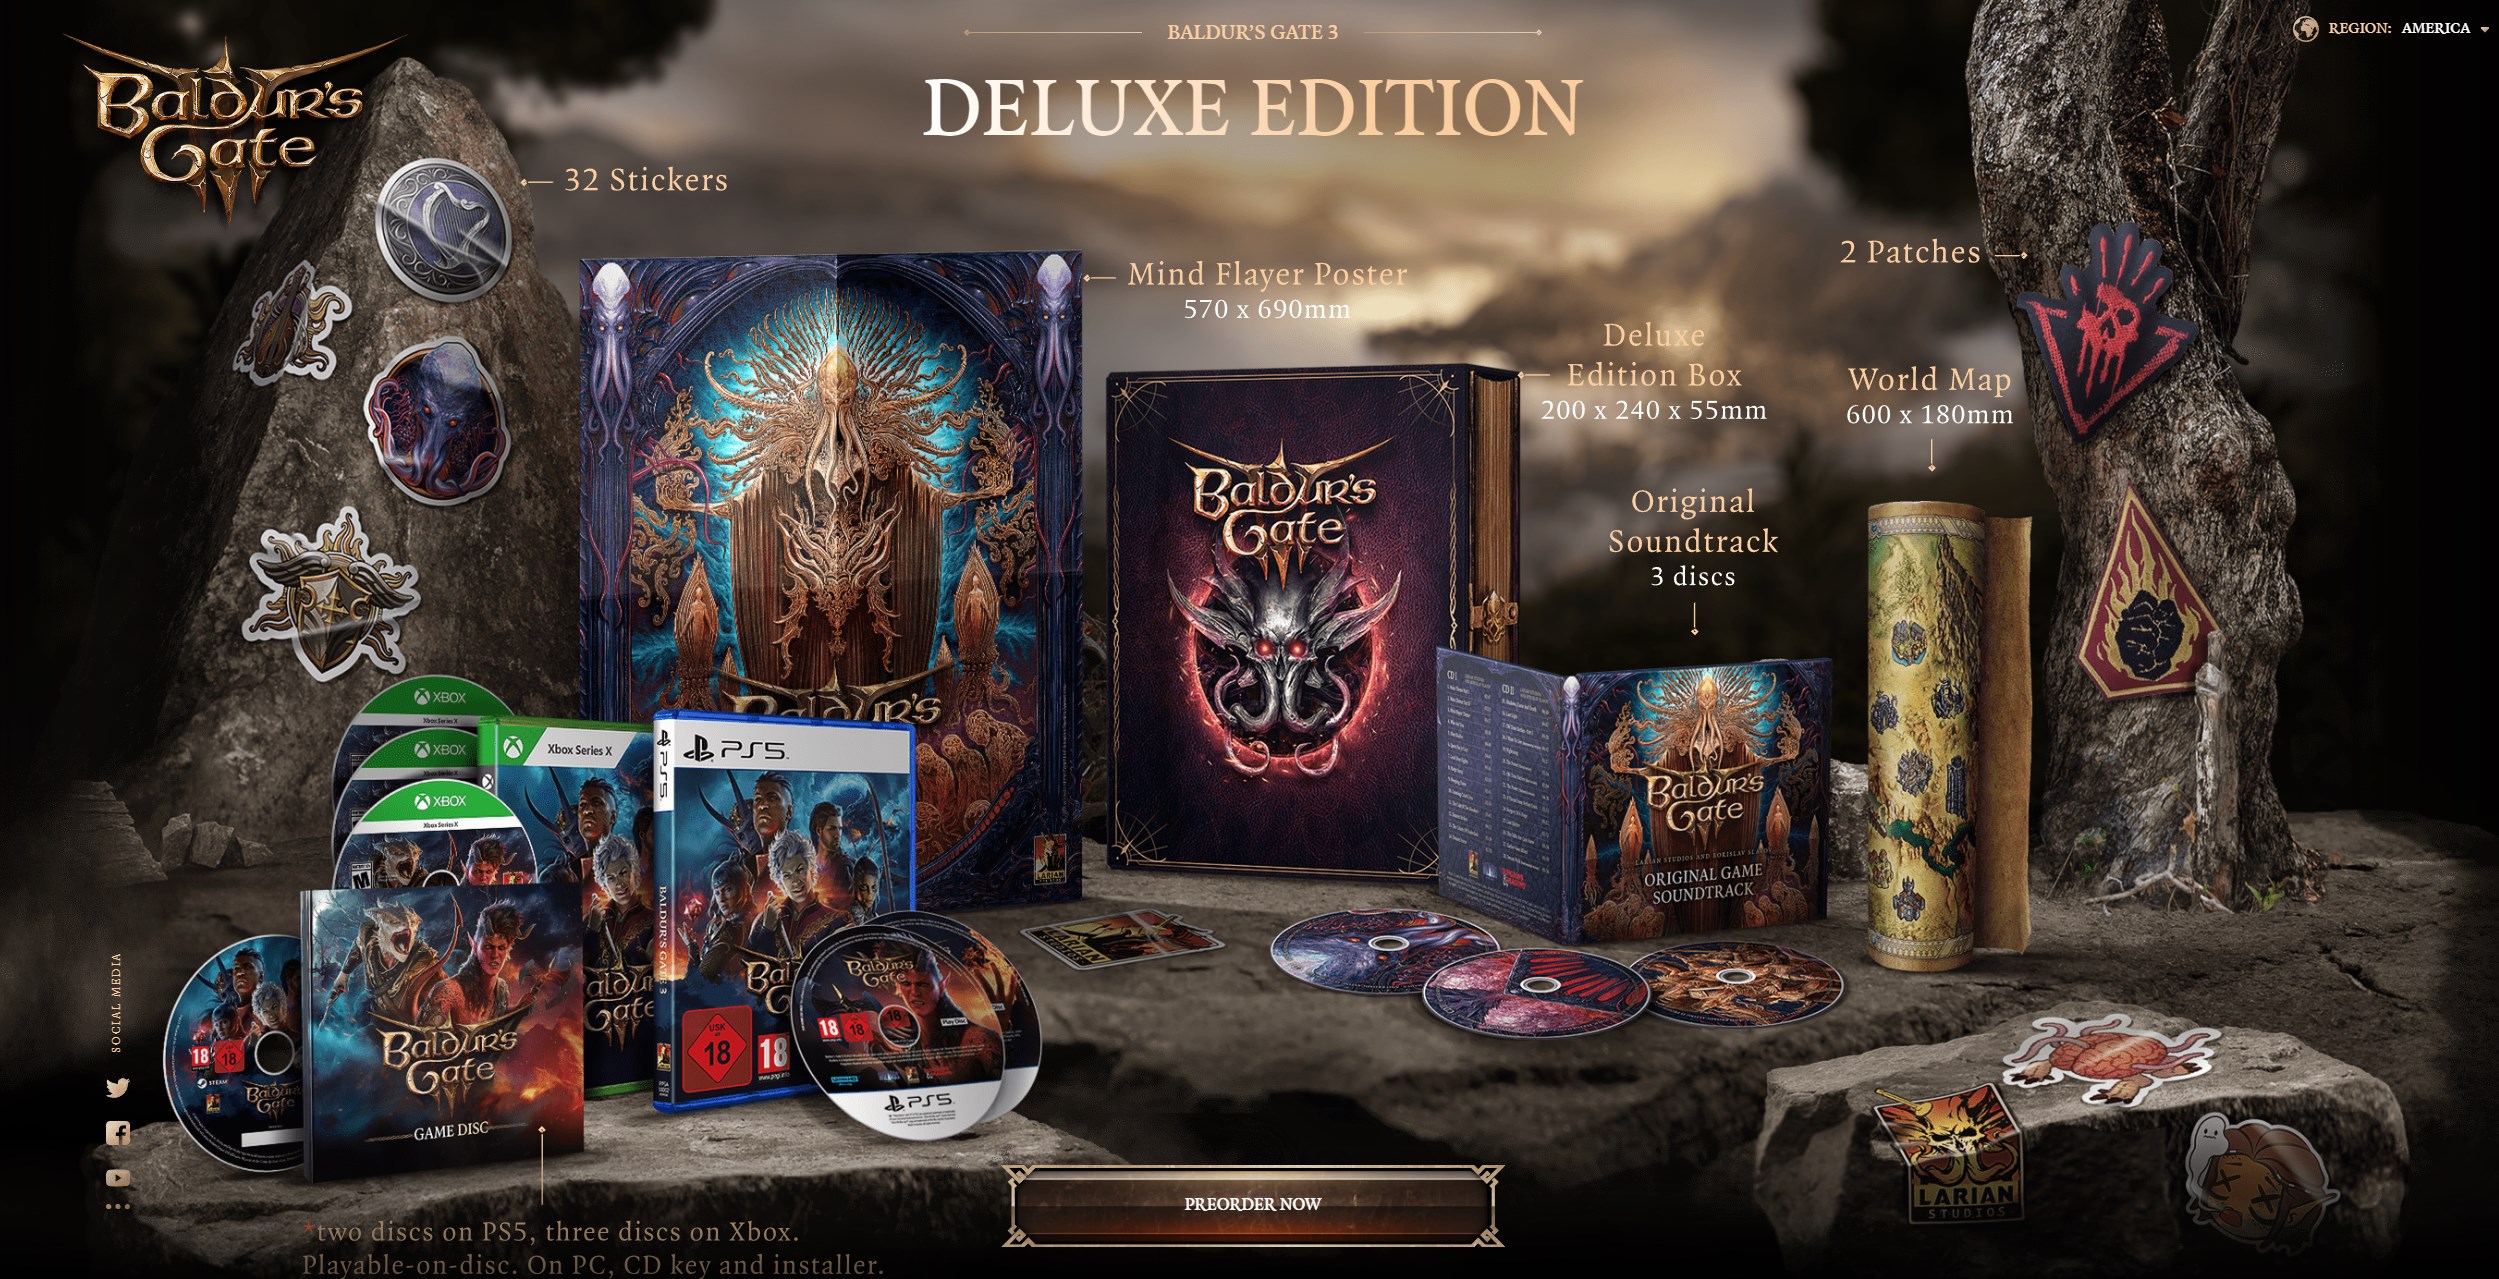 Baldur's Gate 3 Deluxe Edition Physical Contents